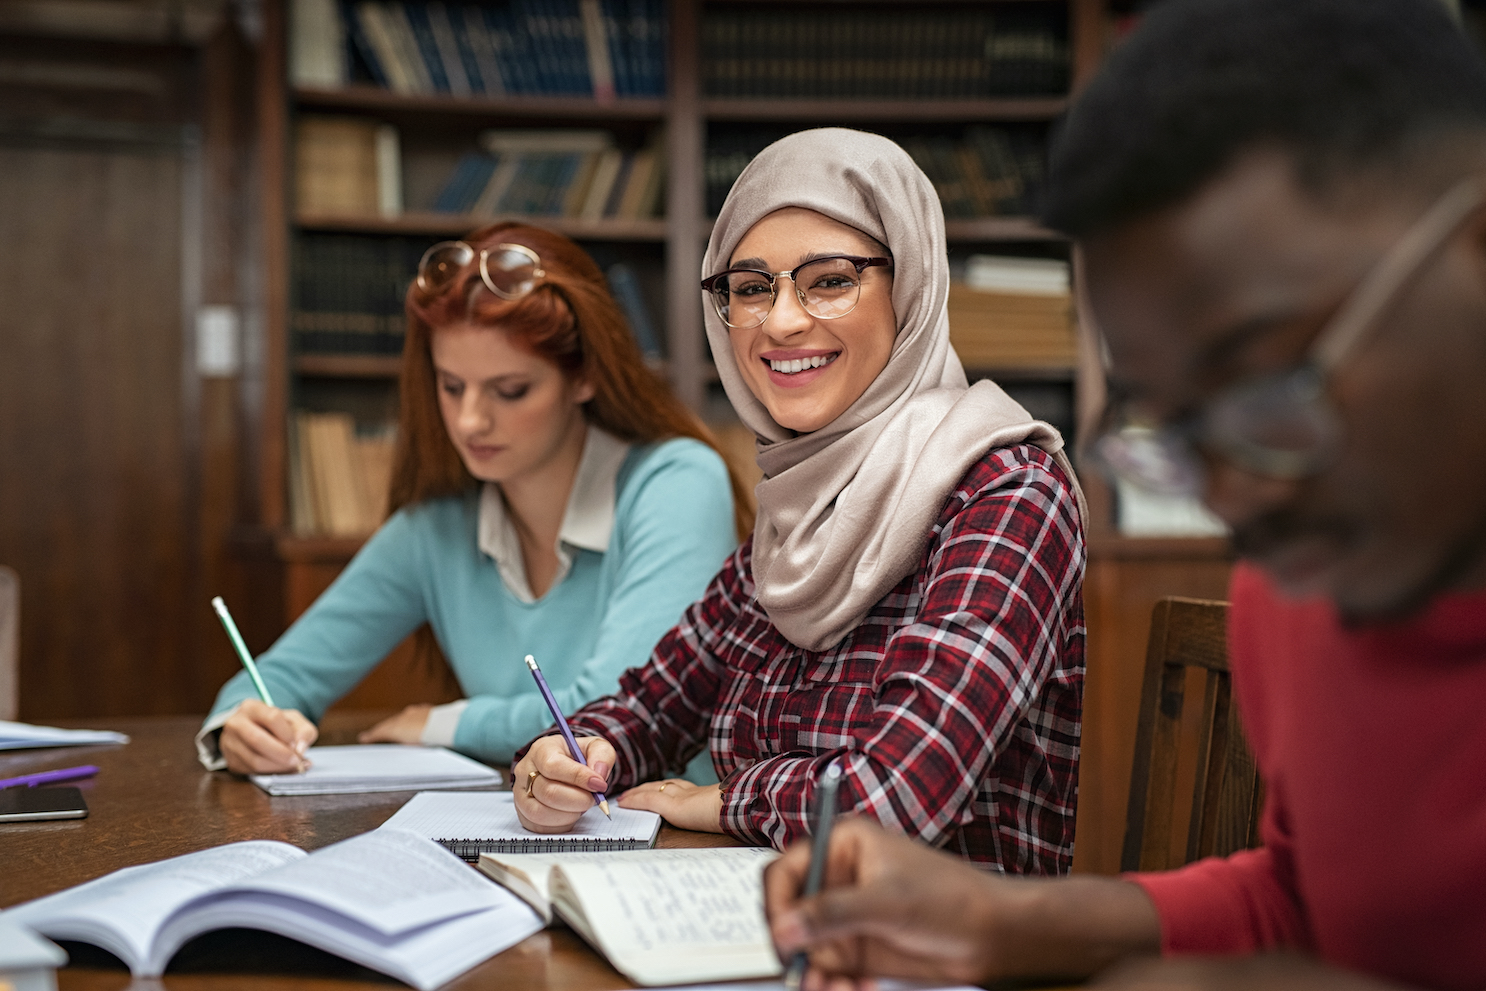 Picture of a young woman in a headscarf taking notes in class and smiling. 